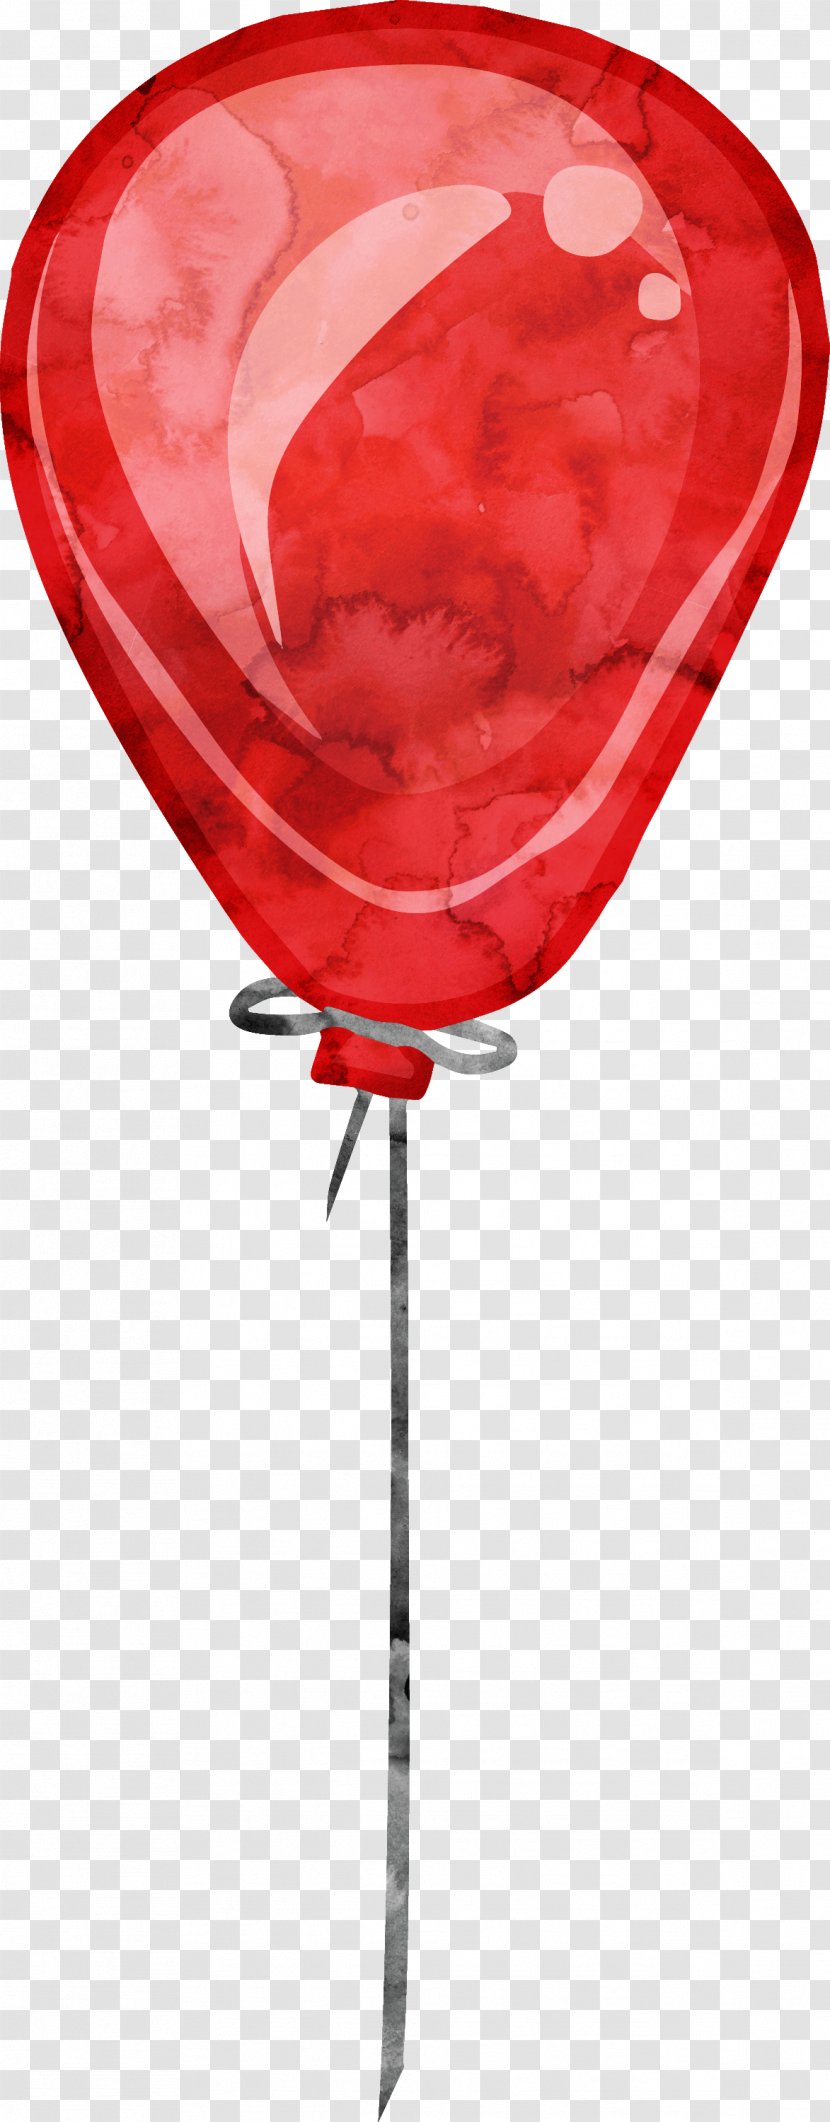 Party Balloon Birthday - Red - Balloons Transparent PNG